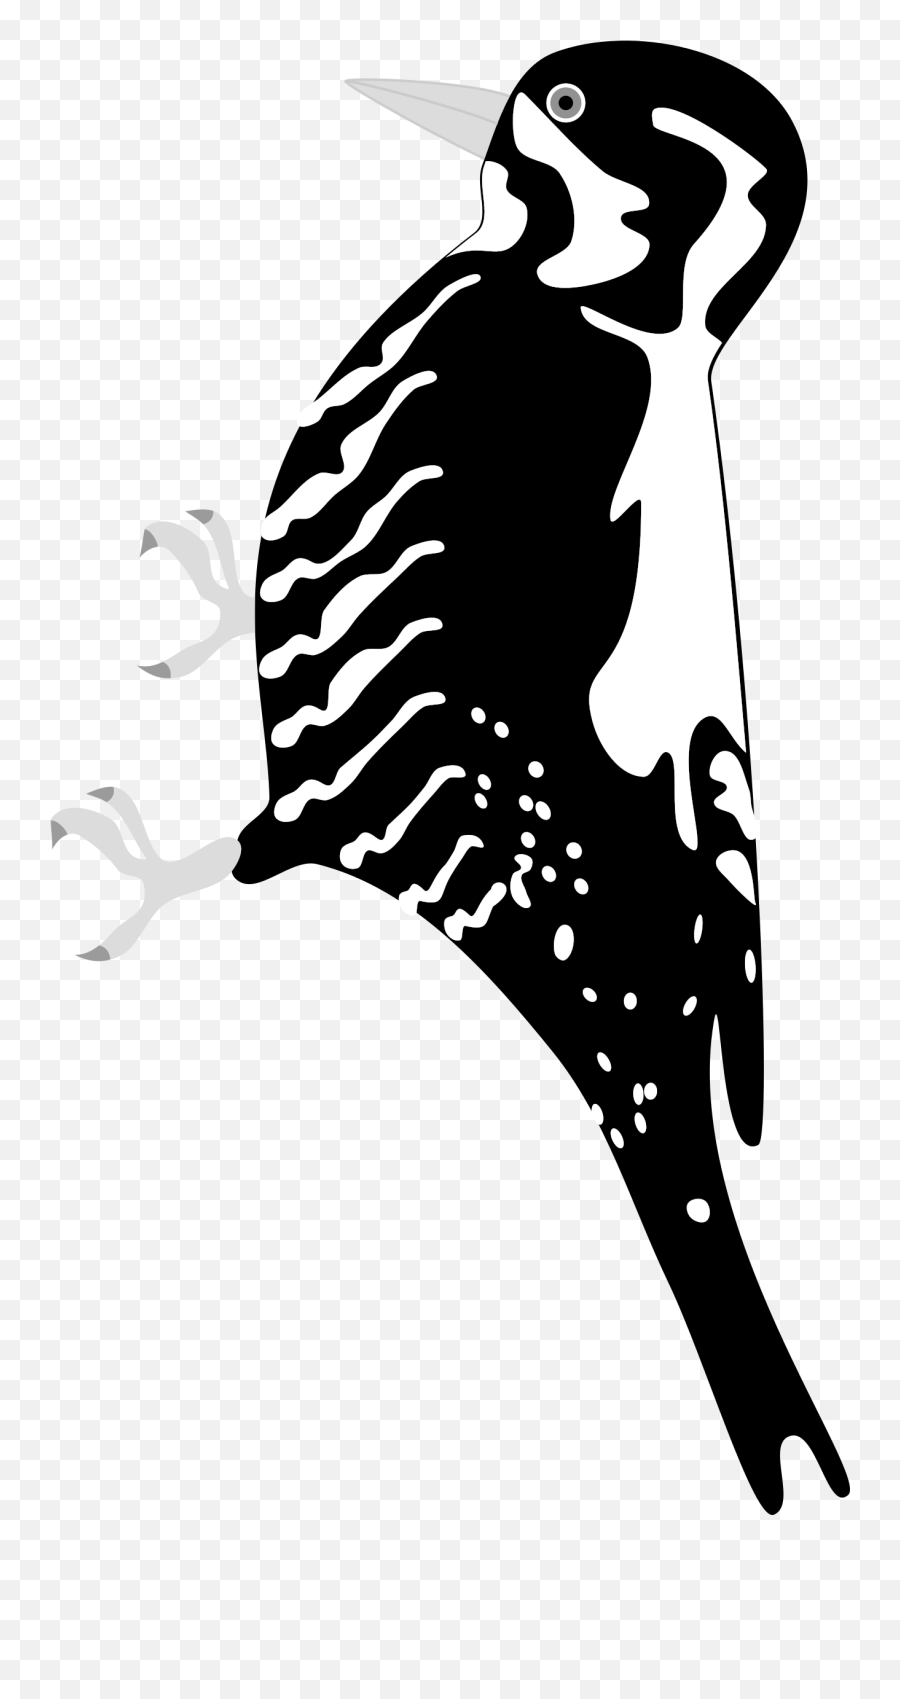 This Free Icons Png Design Of Three - Toed Woodpecker Full Woodpecker On Tree Png,Woodpecker Png